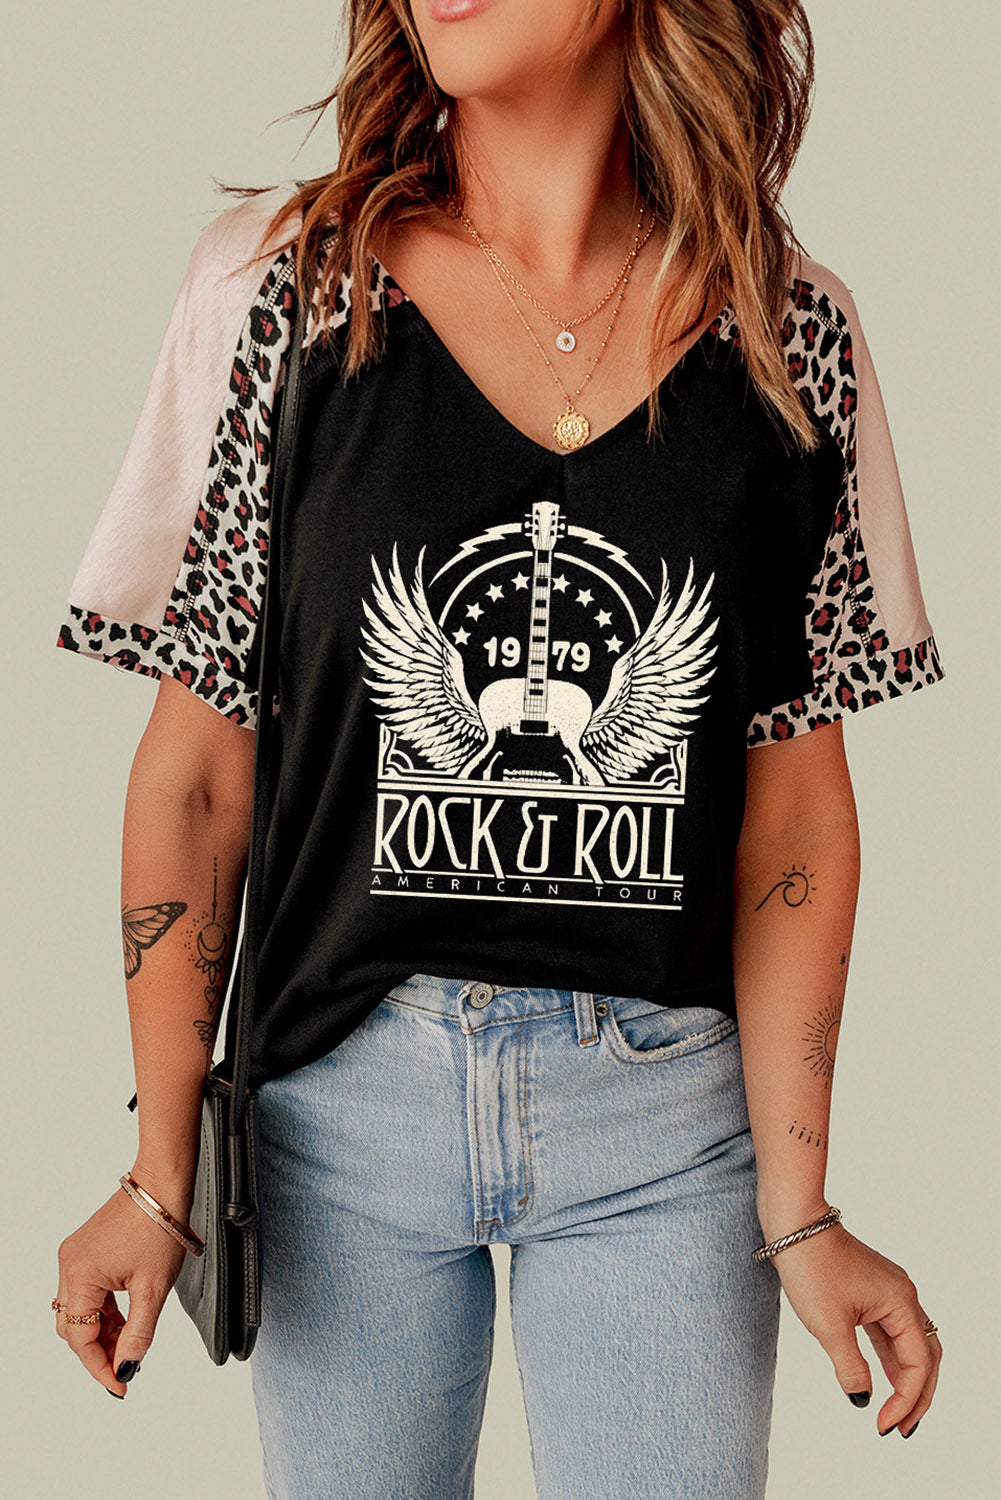 1979 ROCK & ROLL AMERICAN TOUR Graphic V-Neck Tee